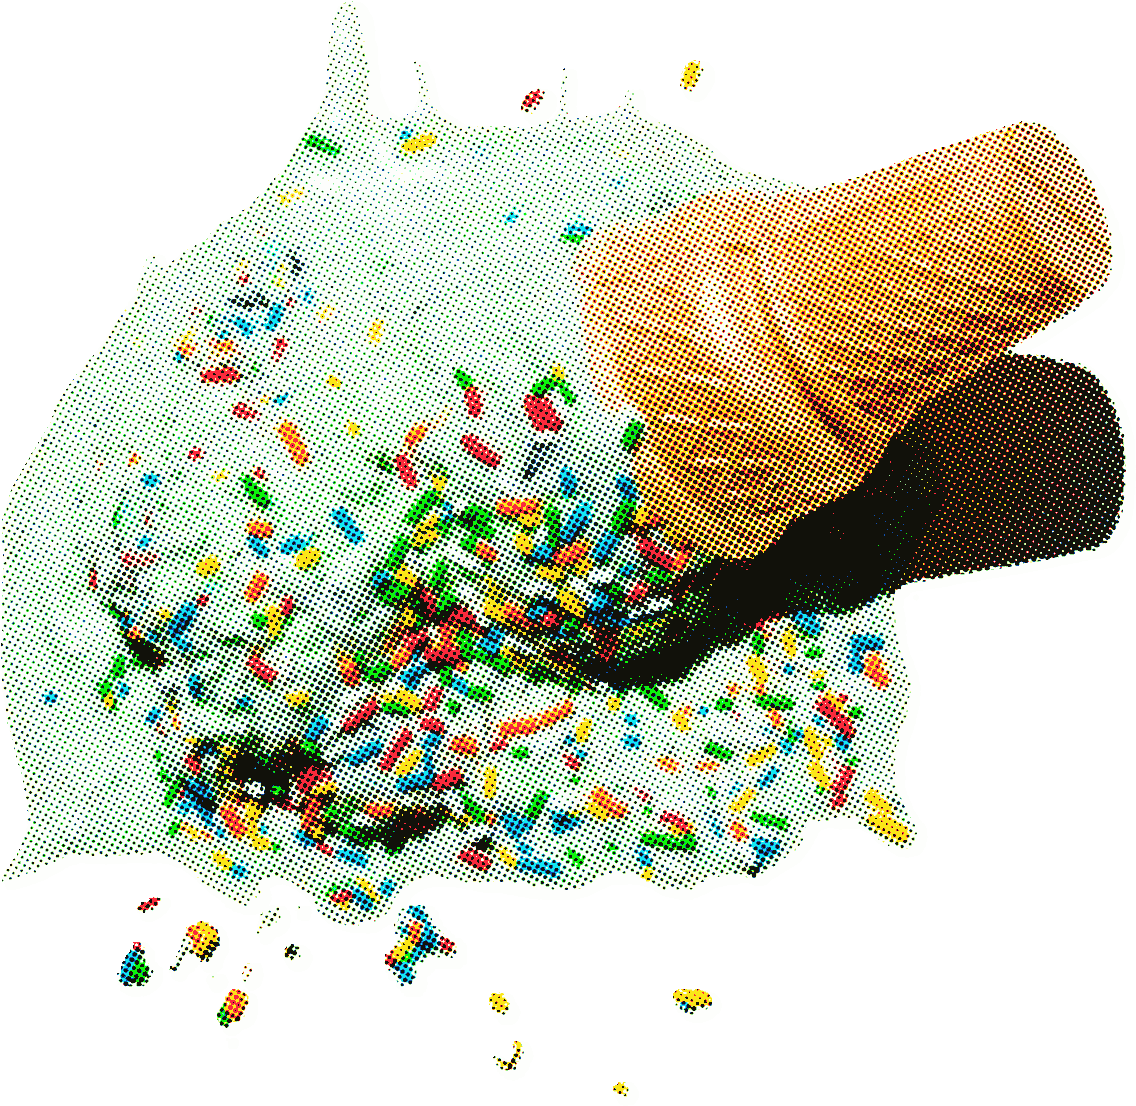 Ice cream with rainbow sprinkles in a cone spilled on the floor.